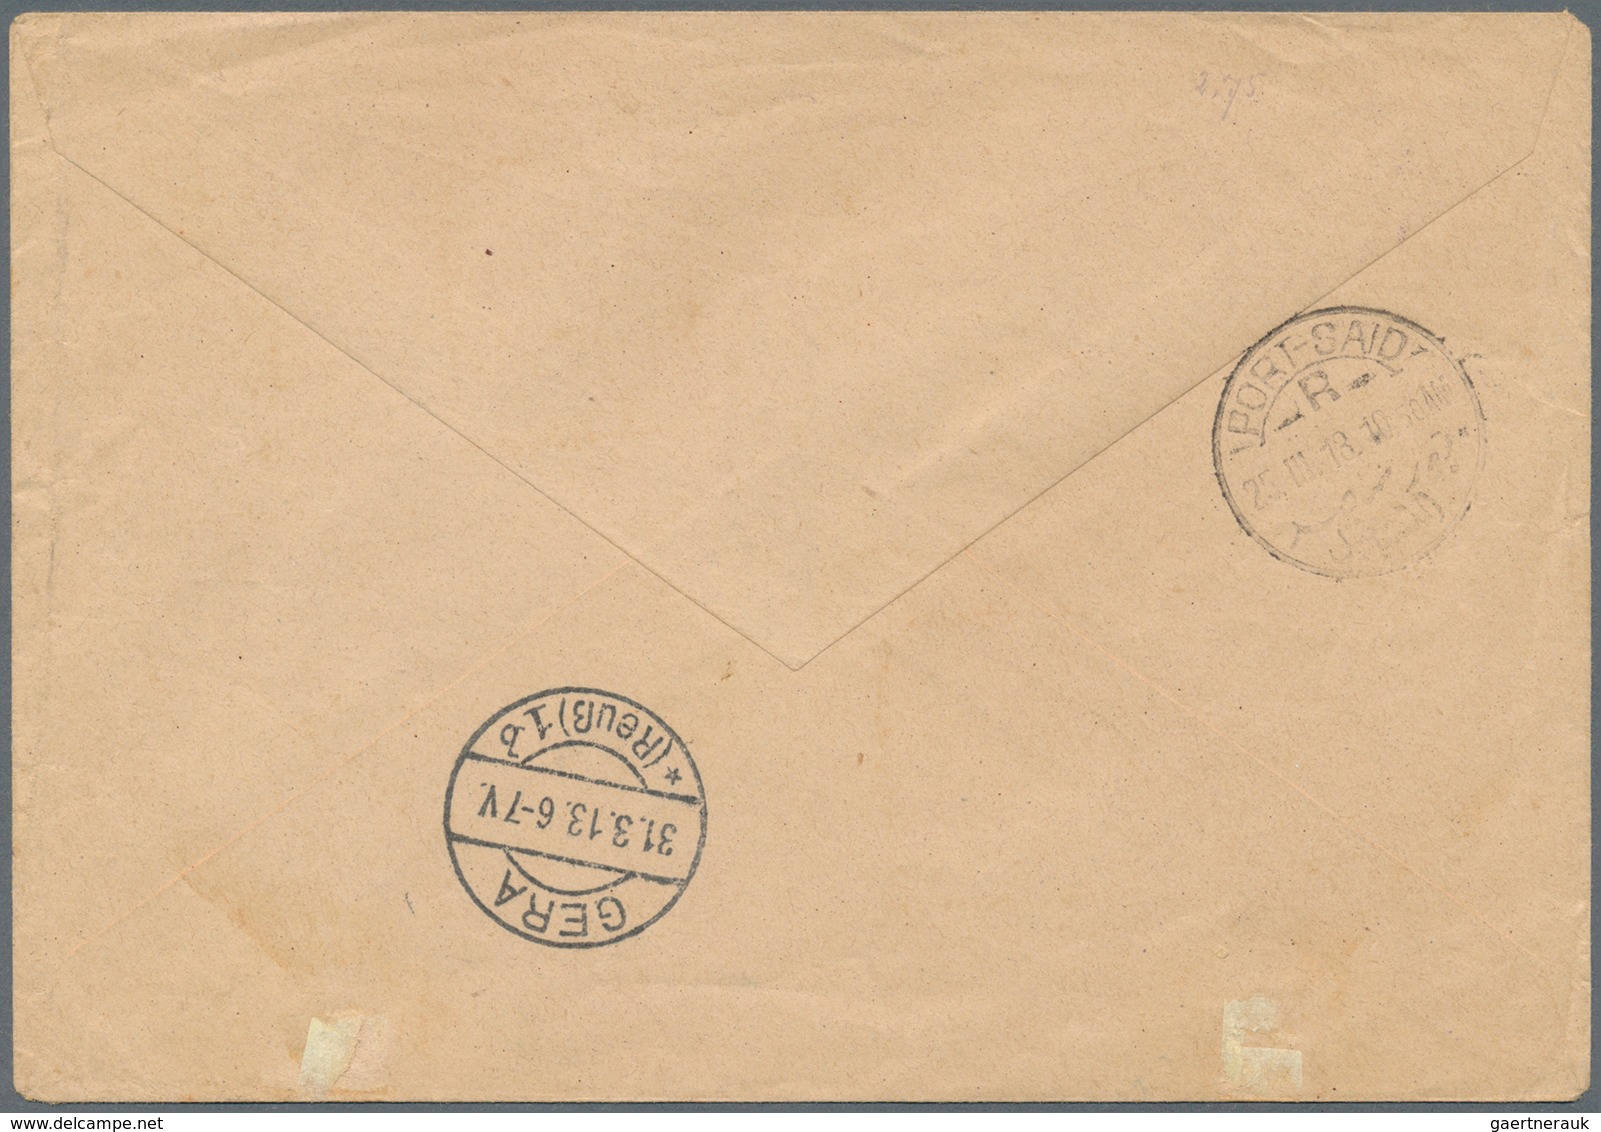 Holyland: 1913, 2 Pia./20 K. Tied Violet "ROPIT JAFFA -7 3 13" To Registered Cover To Germany, On Re - Palästina